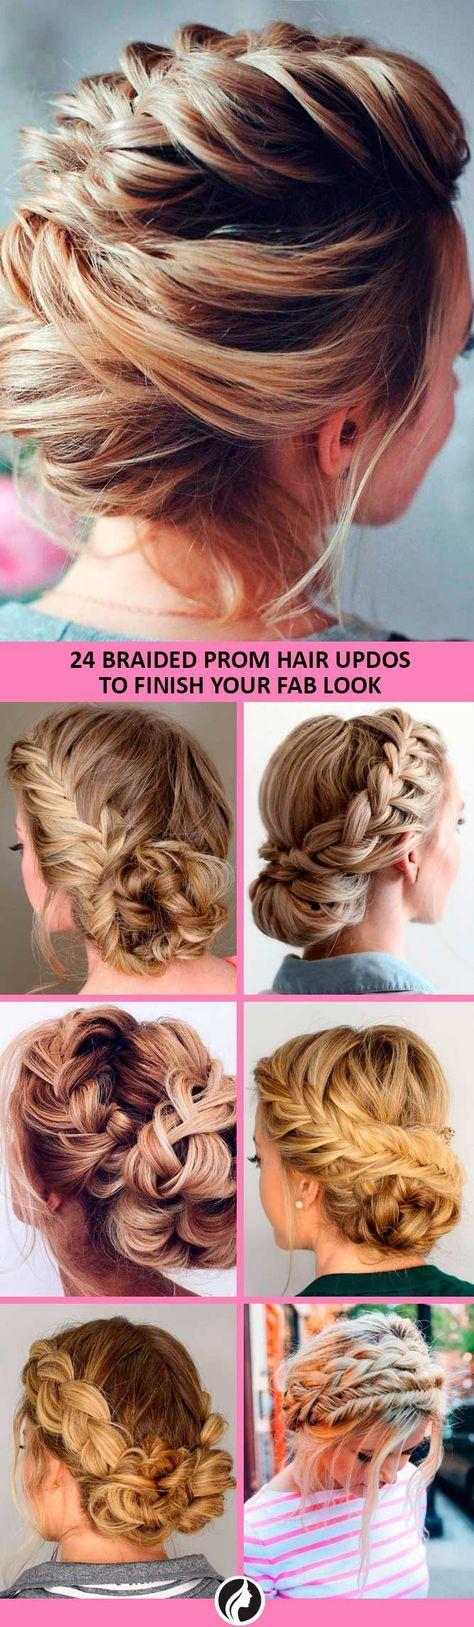 Wedding - 30 Braided Prom Hair Updos To Finish Your Fab Look